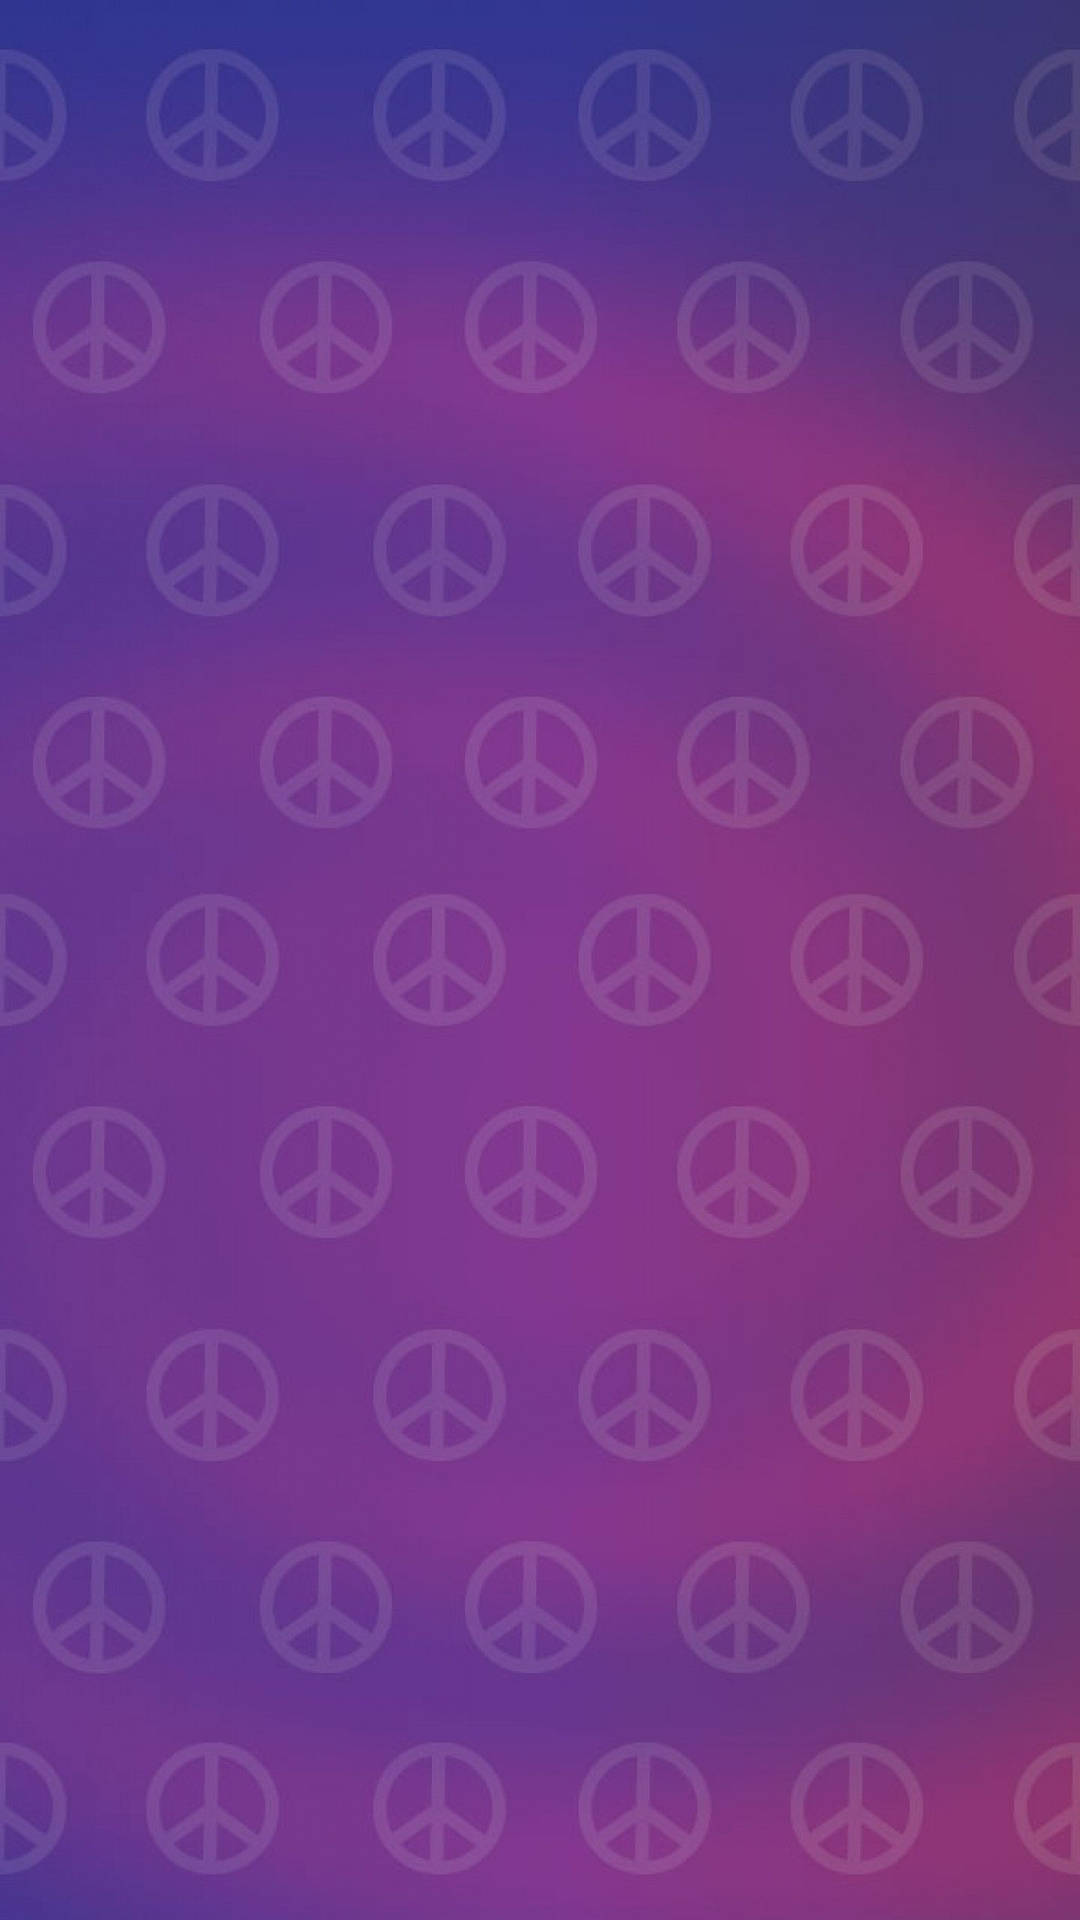 Hippie Iconic Peace Sign Wallpaper